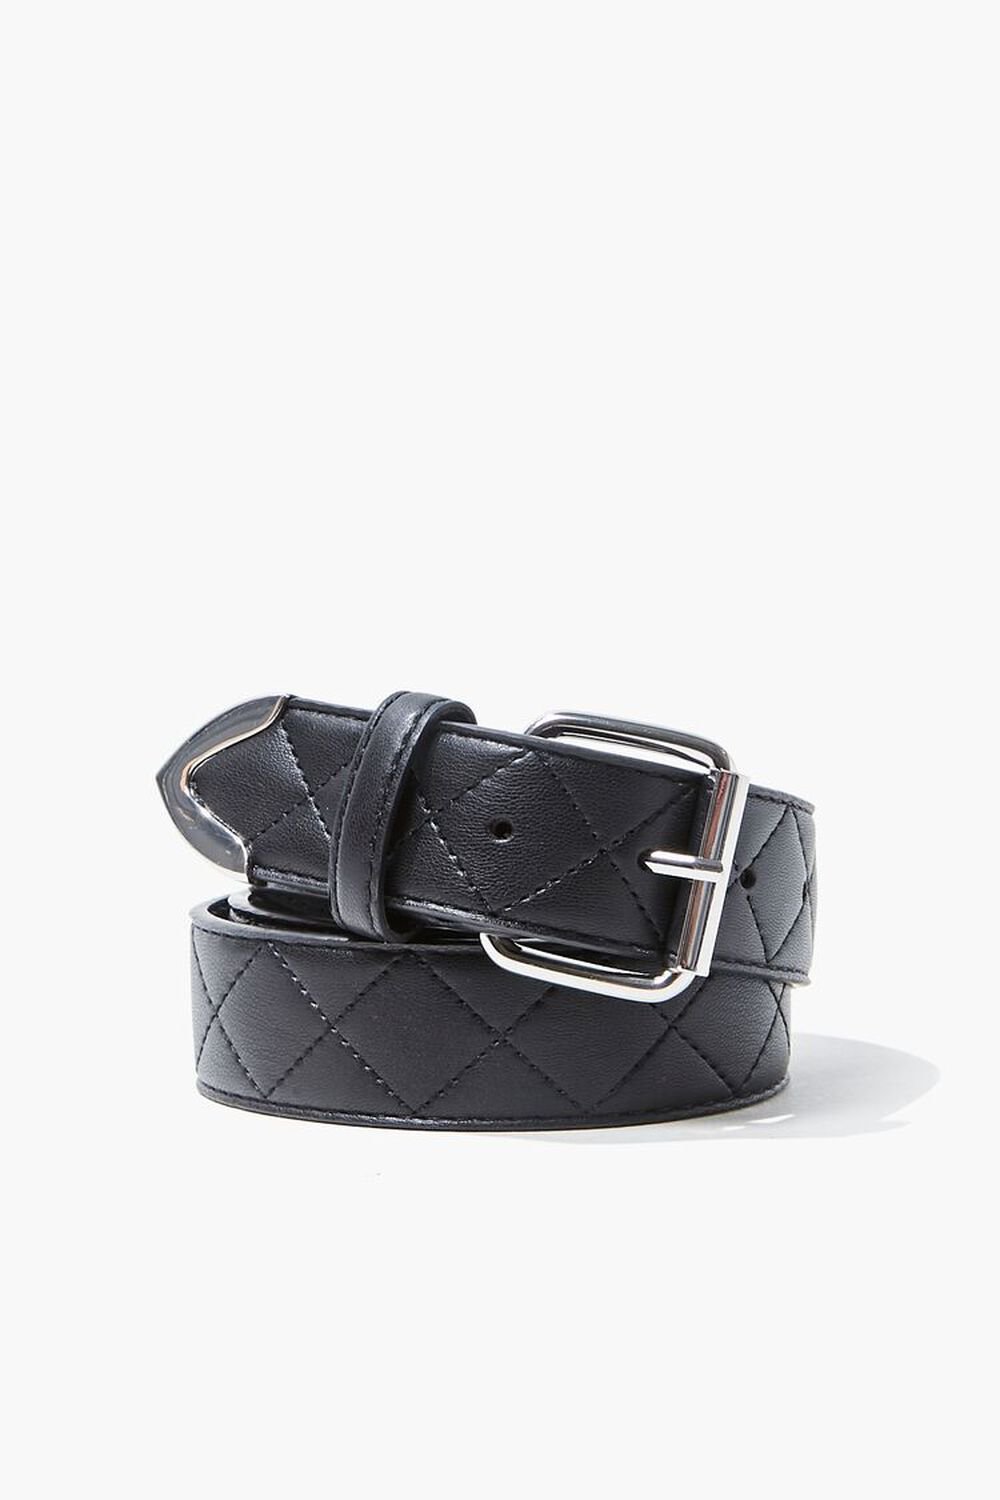 BLACK/SILVER Faux Leather Quilted Hip Belt, image 1